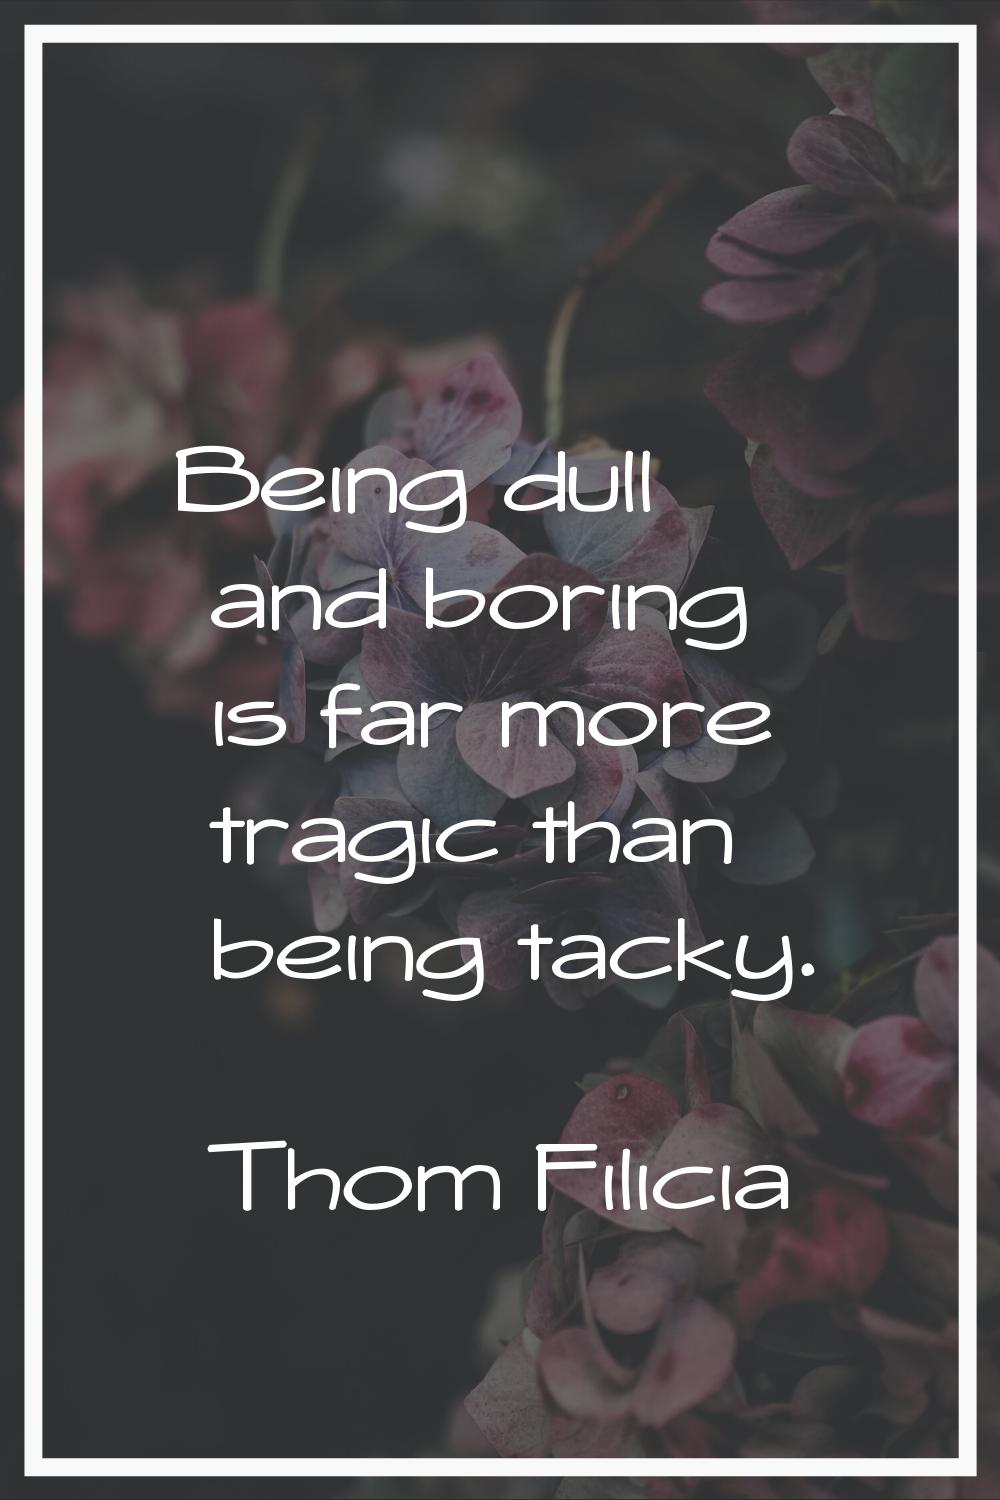 Being dull and boring is far more tragic than being tacky.